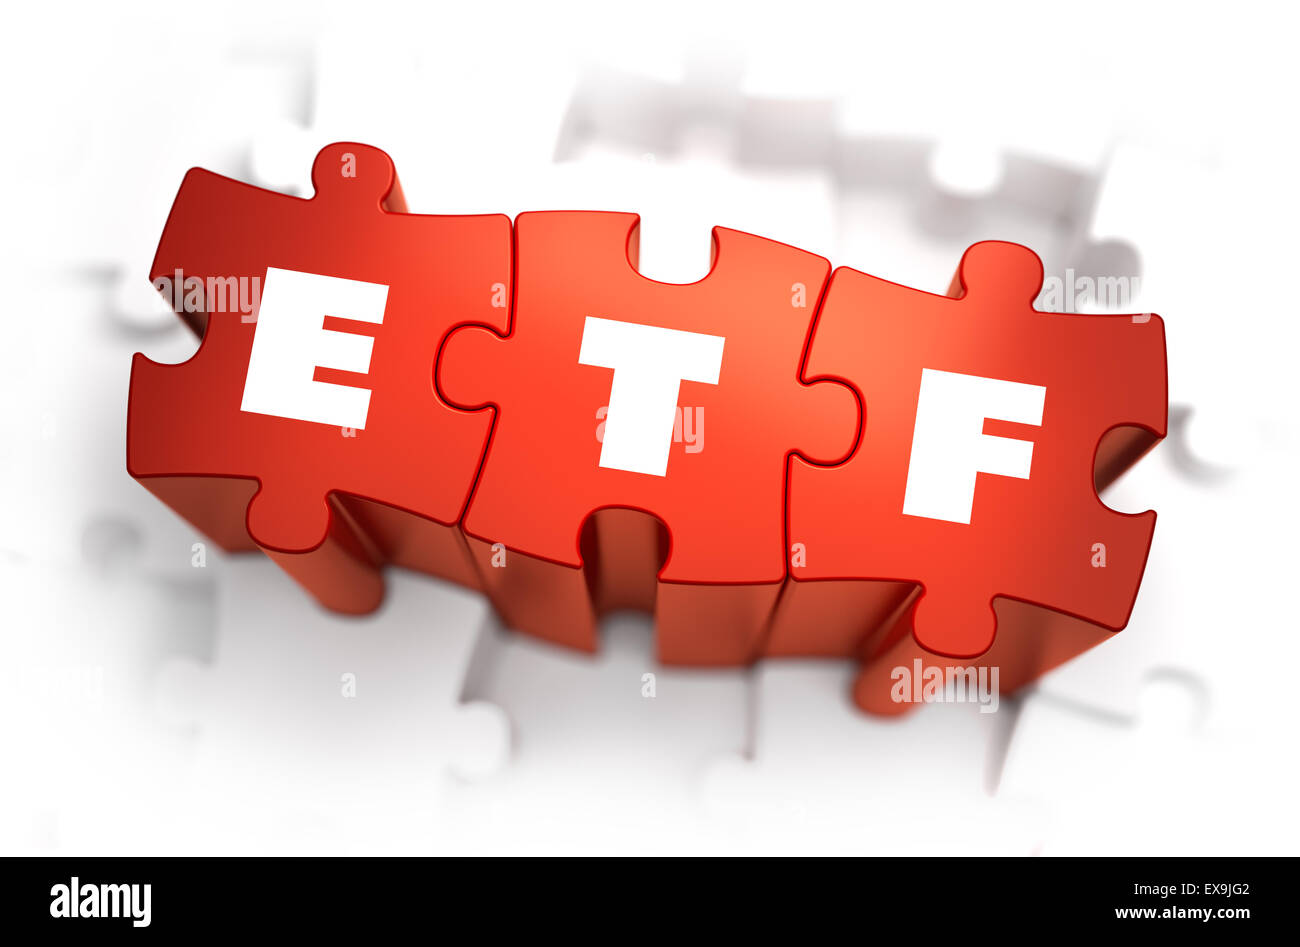 ETF - Text on Red Puzzles. Stock Photo